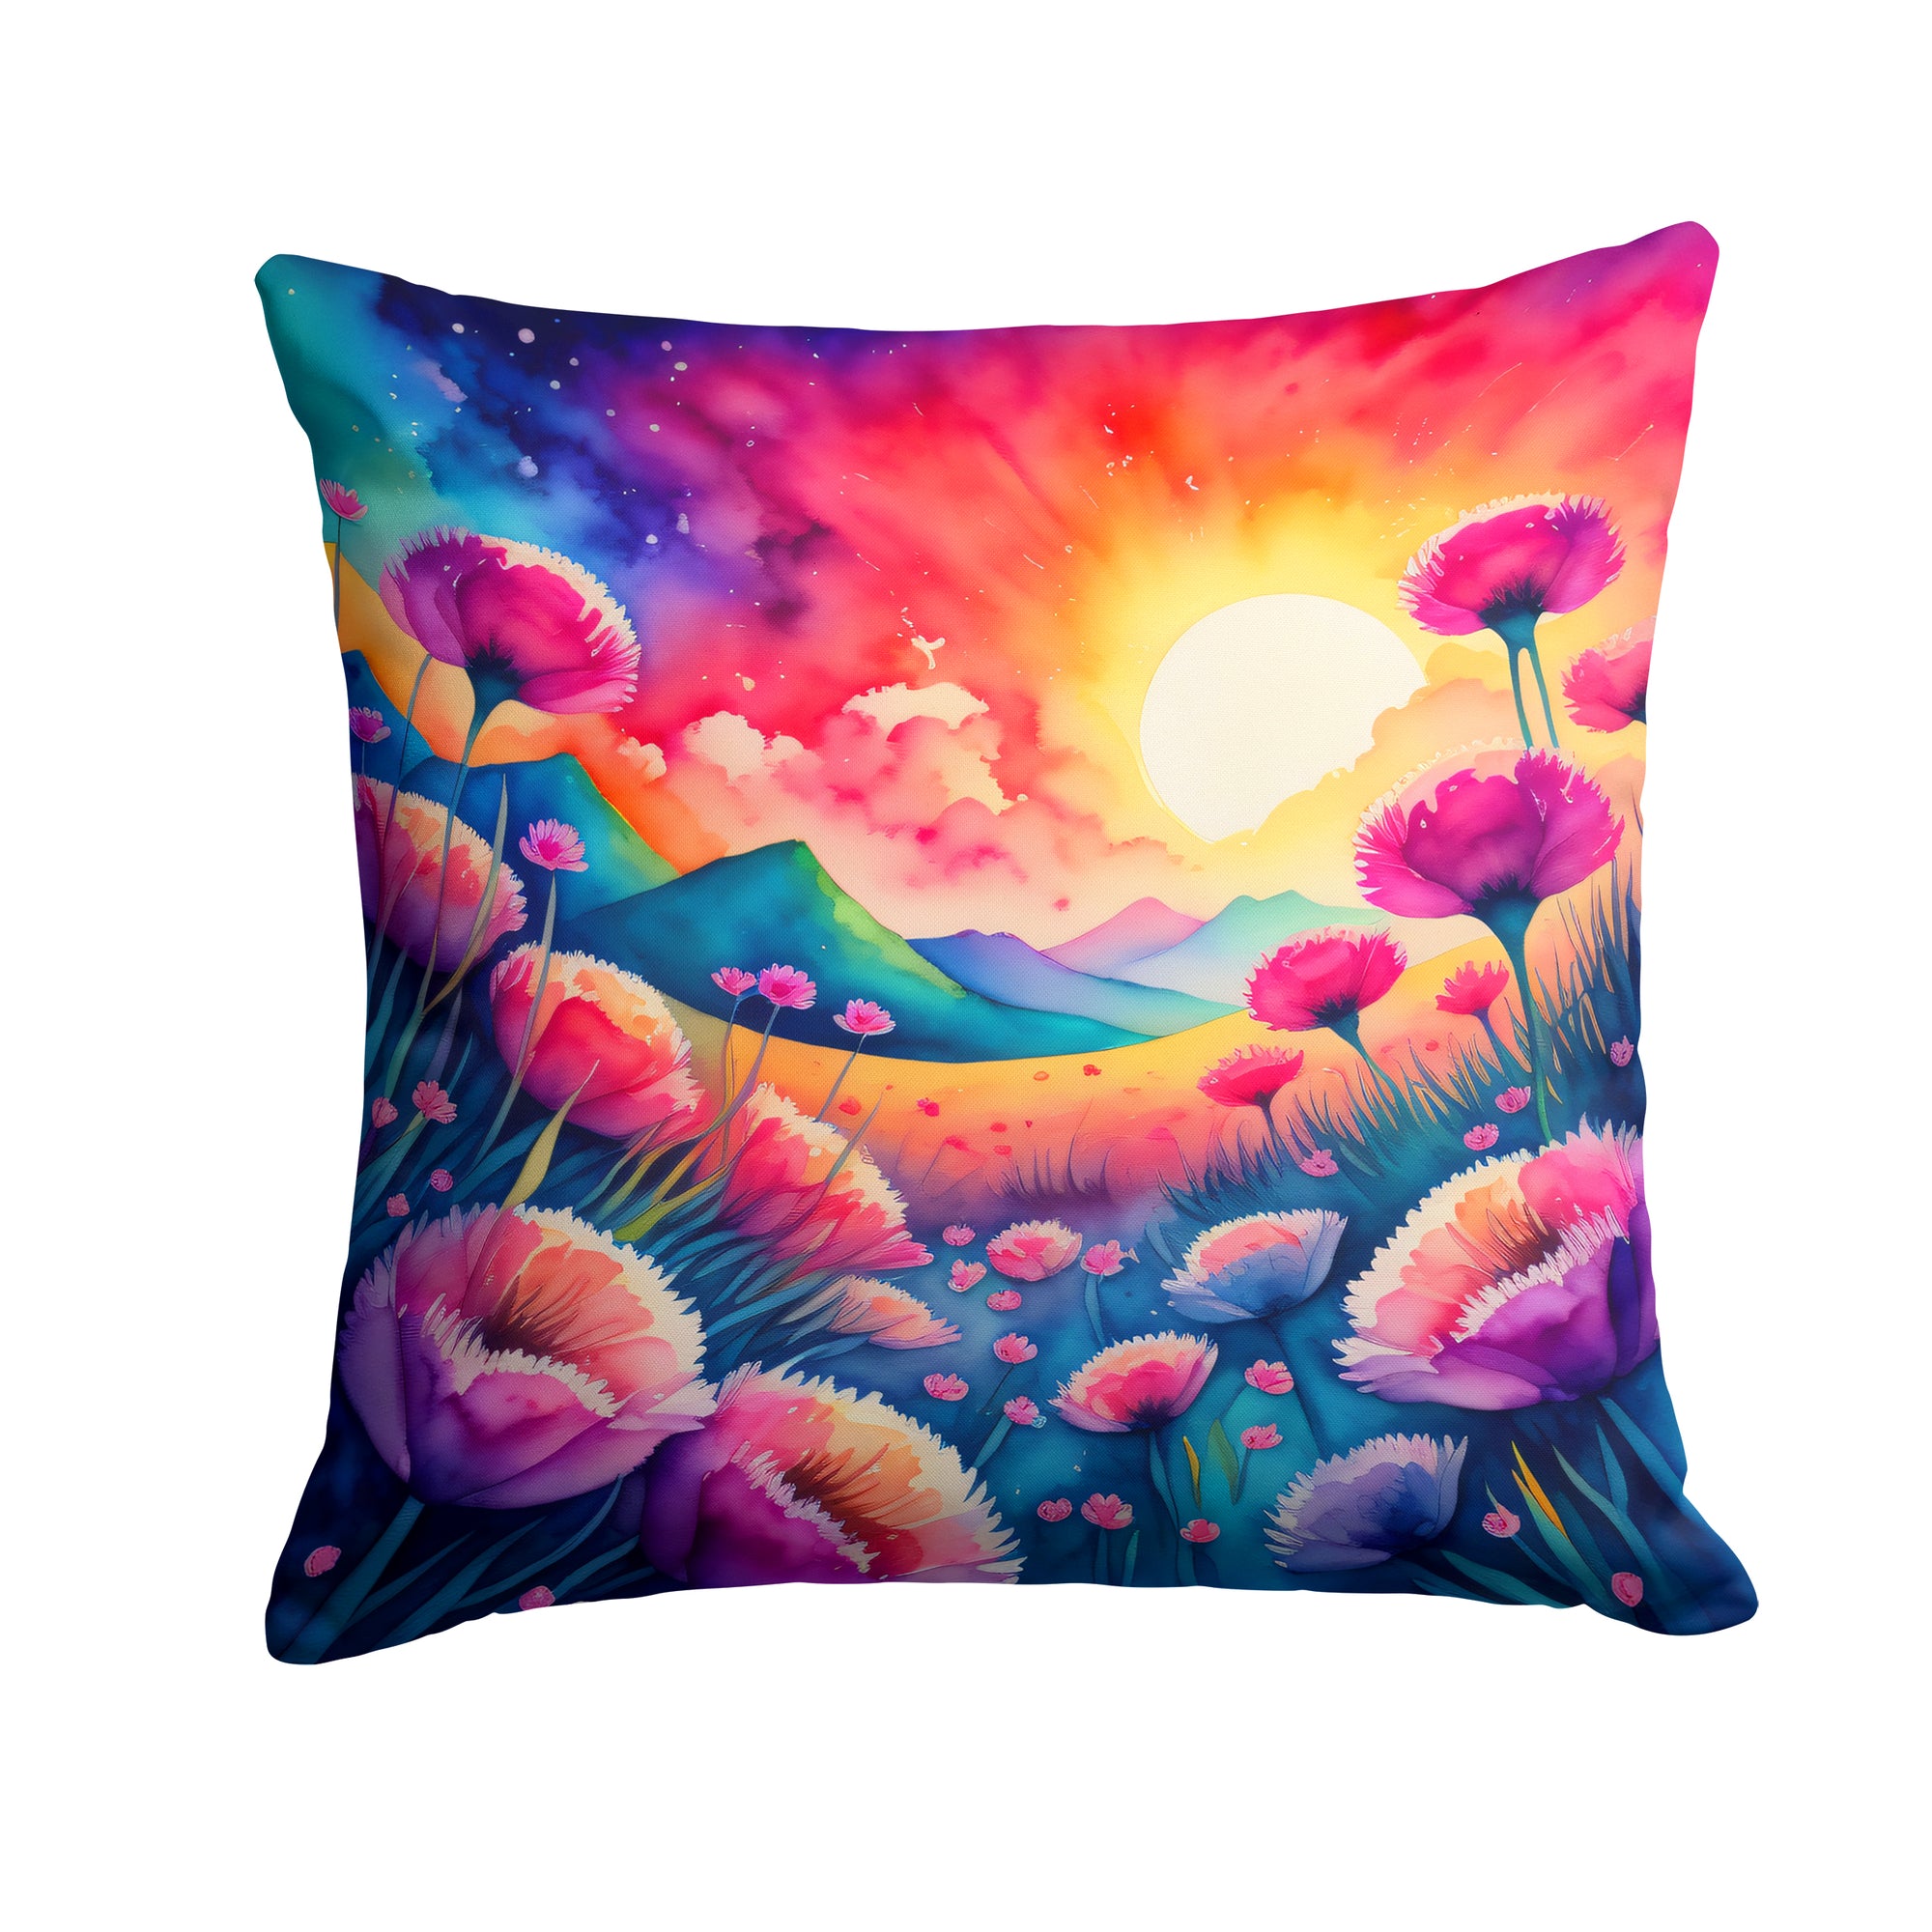 Buy this Colorful Dianthus Fabric Decorative Pillow